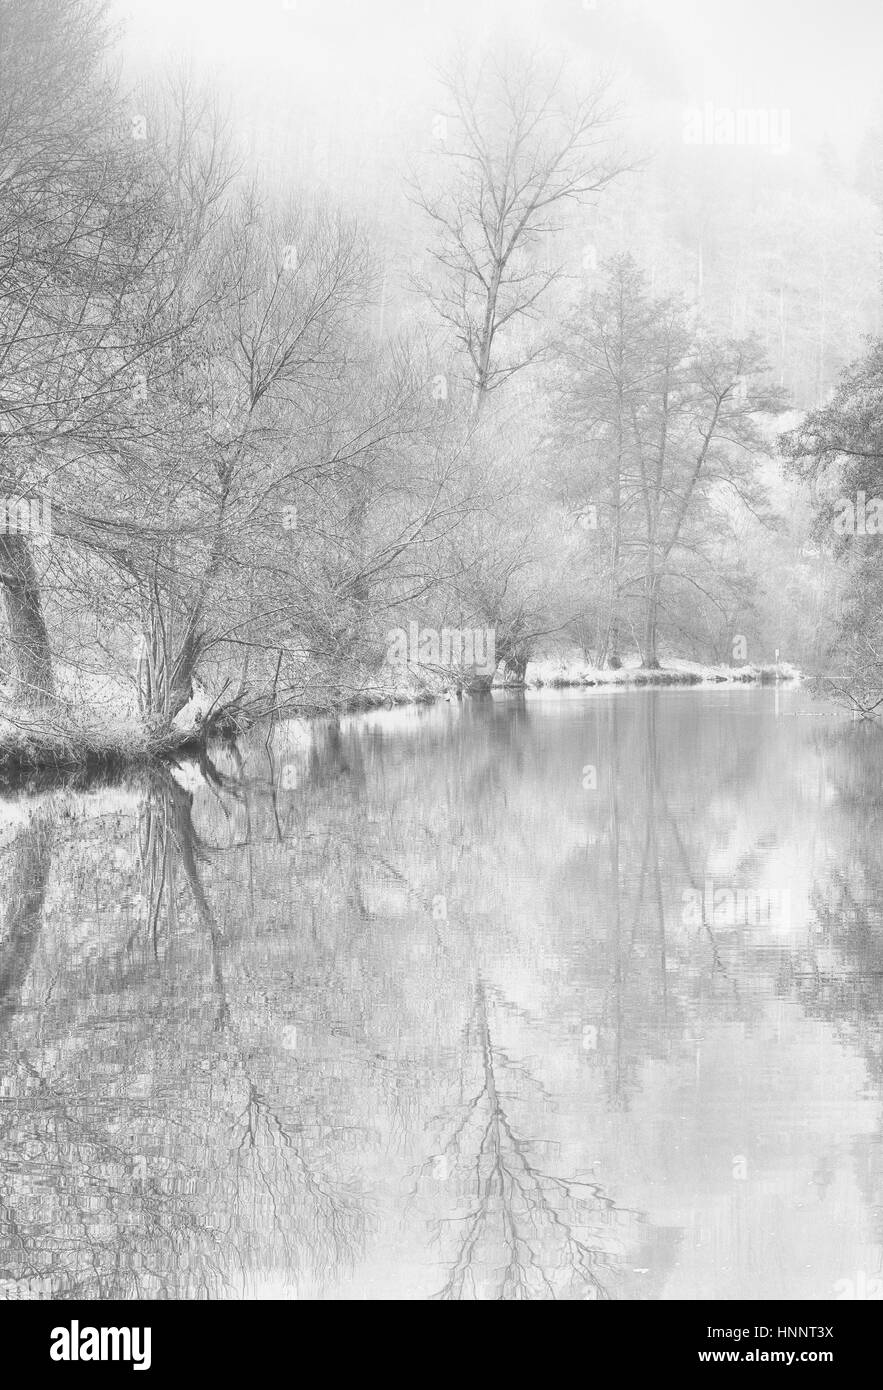 idyllic misty  snowy monochrome riverside,old trees reflecting on the water,vintage painting style, black and white high key landscape impression Stock Photo